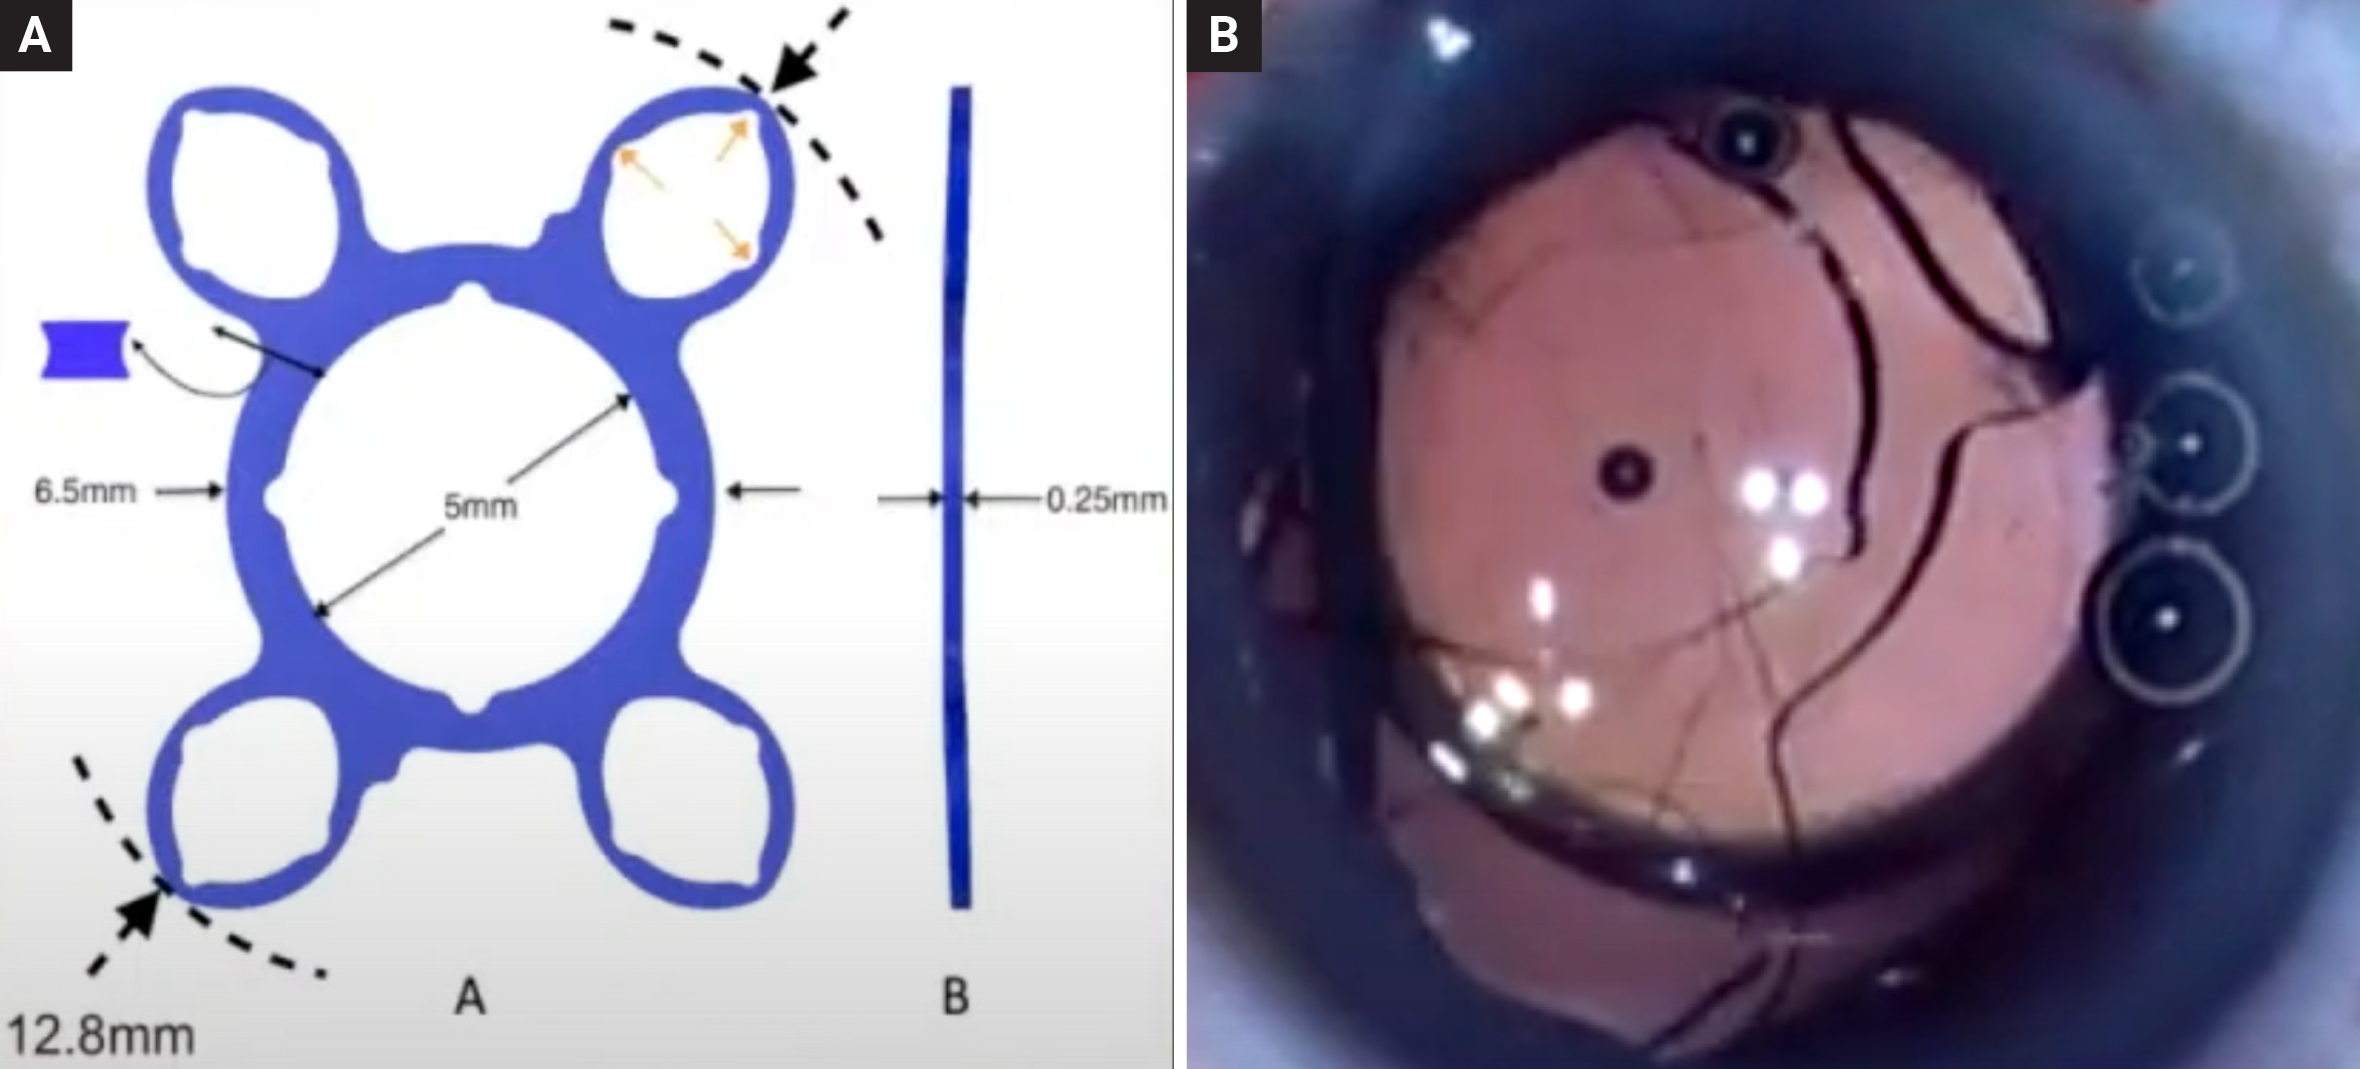 The ND Ring, which is not yet available in the US, may help clinicians avoid common issues encountered with other intraoperative solutions. Figure A shows a diagram of the design and Figure B presents an intraoperative view of it during implantation.